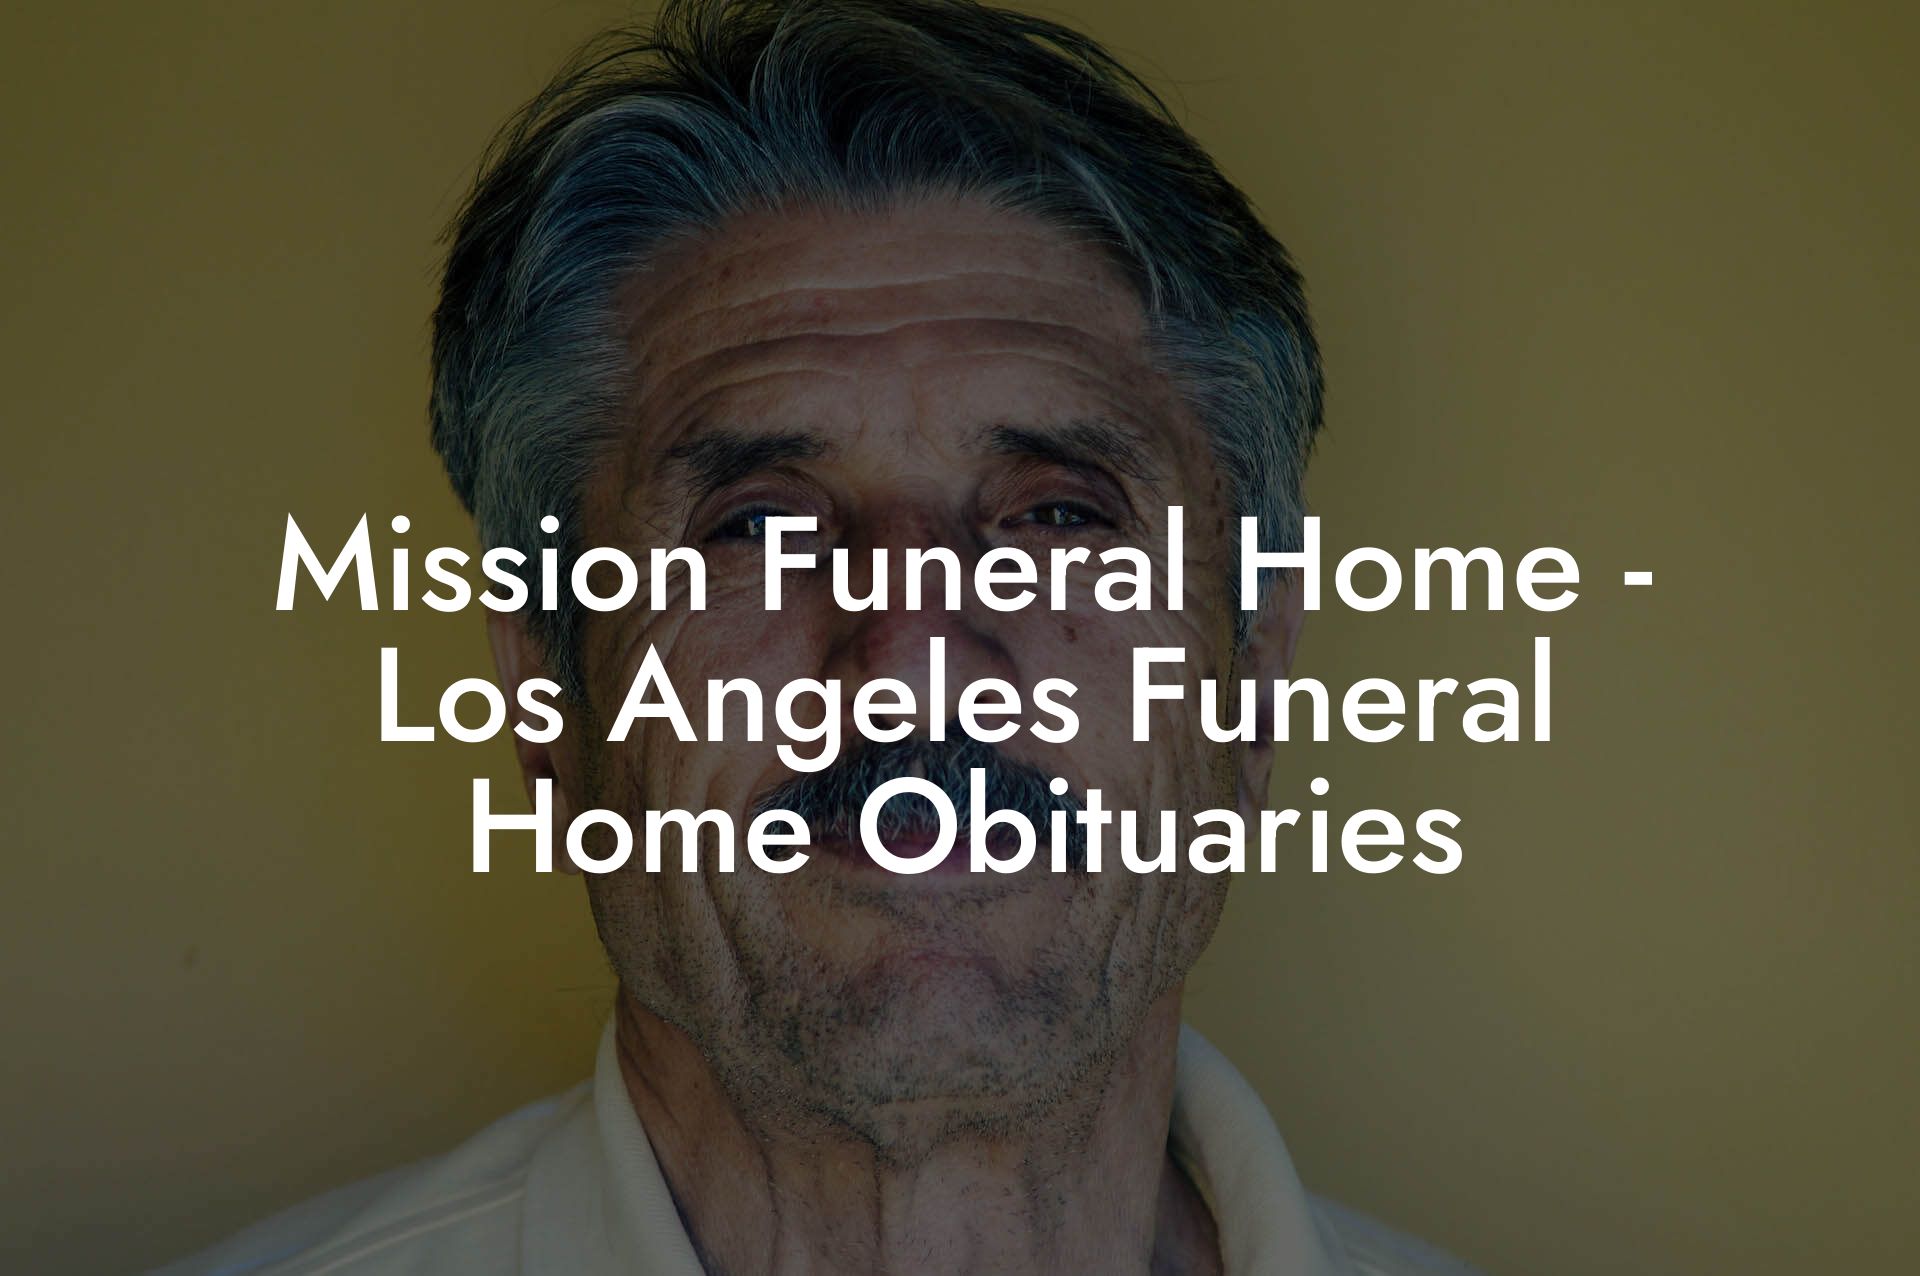 Mission Funeral Home - Los Angeles Funeral Home Obituaries